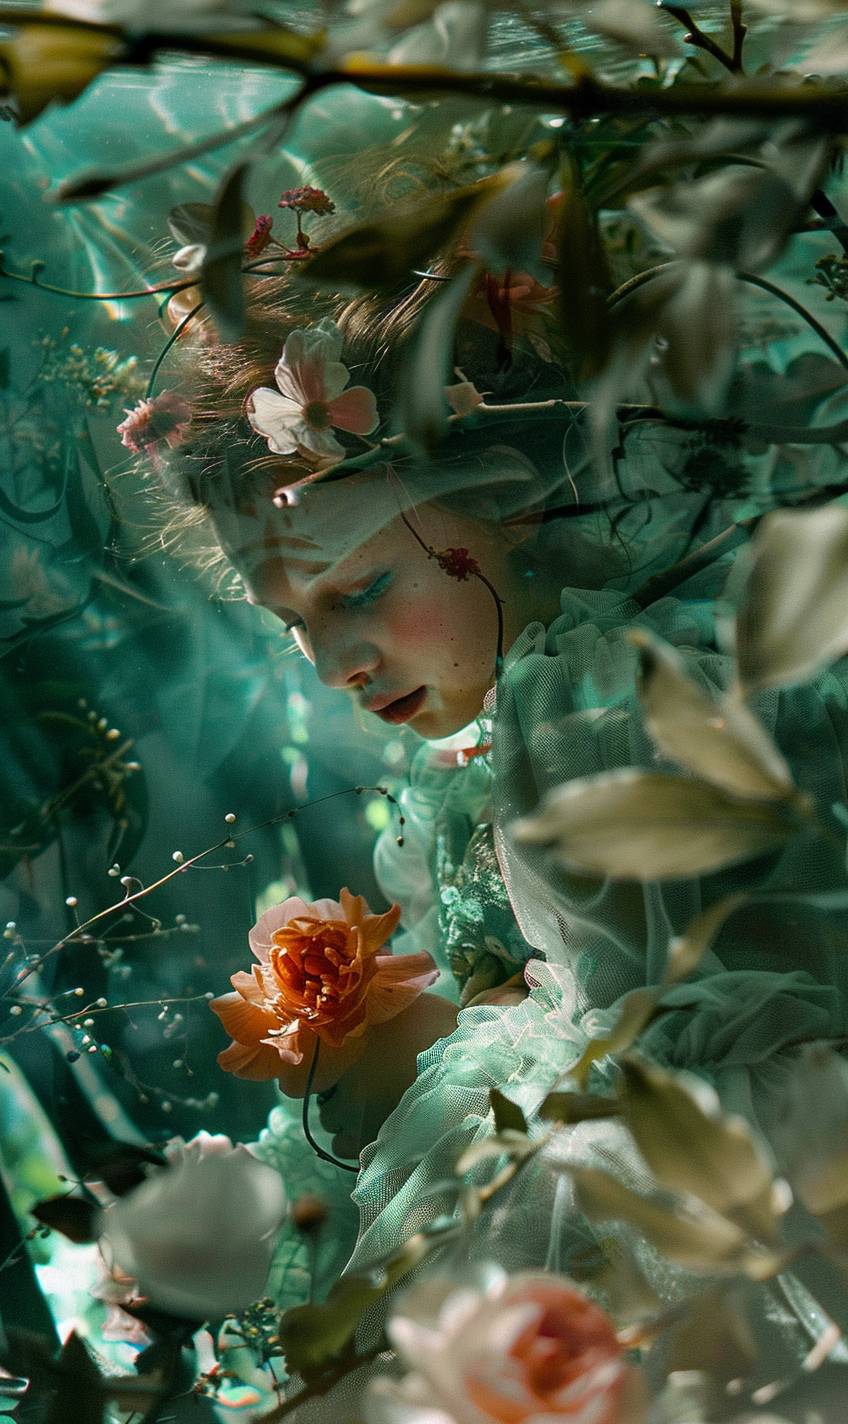 Photograph of fairytale character by Jessica Backhaus